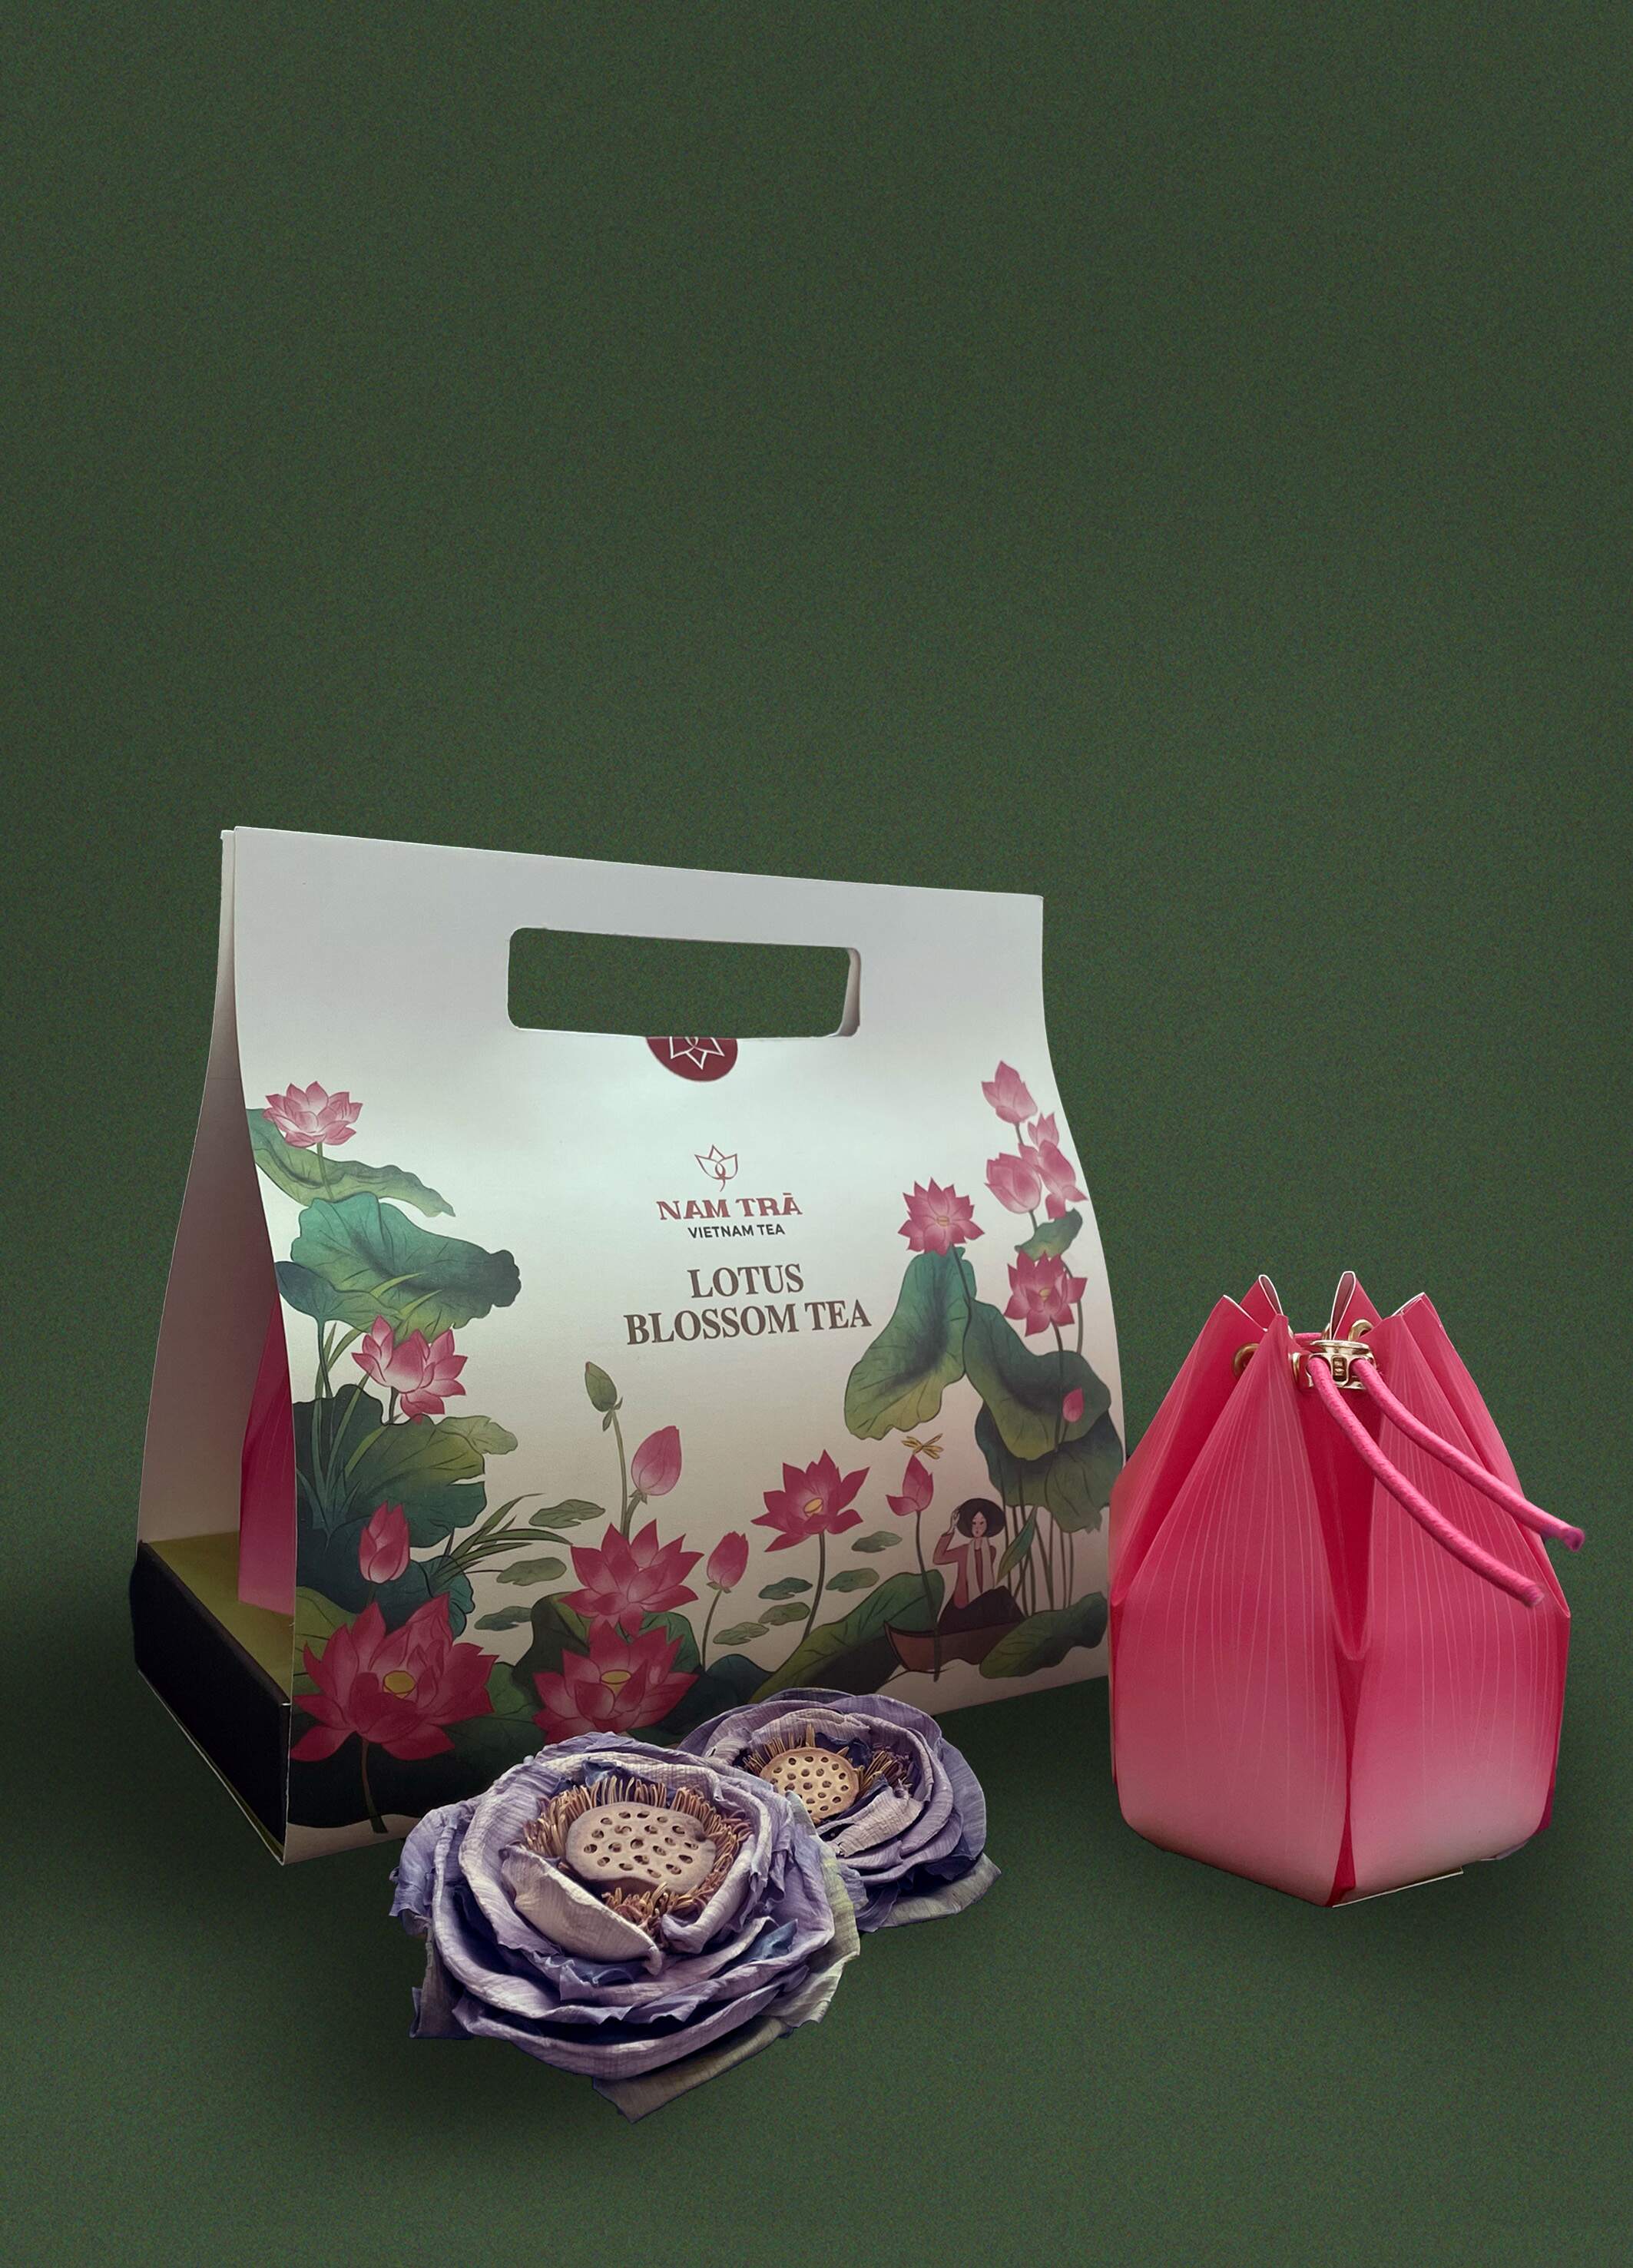 Lotus Blossom Tea Student Packaging Concept